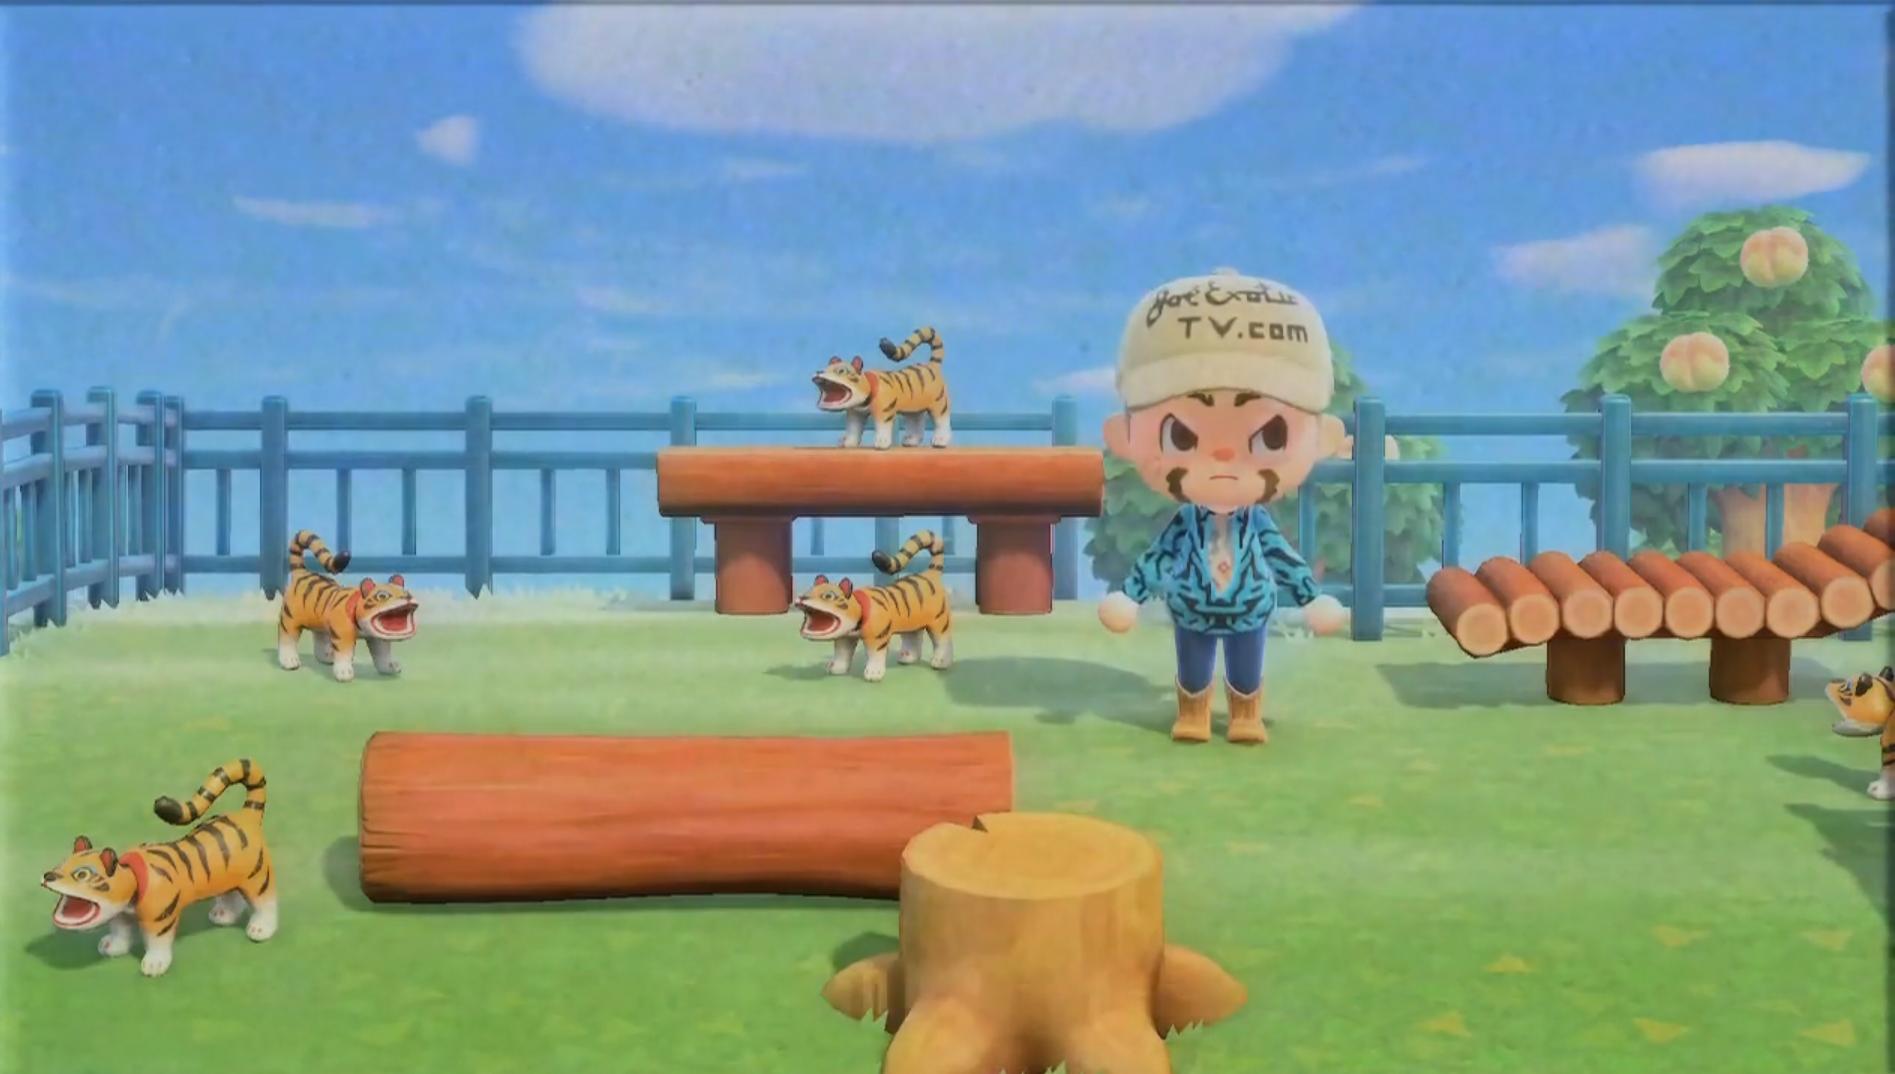 Tiger King main character Joe Exotic has made his Animal Crossing: New Horizons debut thanks to a hilarious crossover trailer.